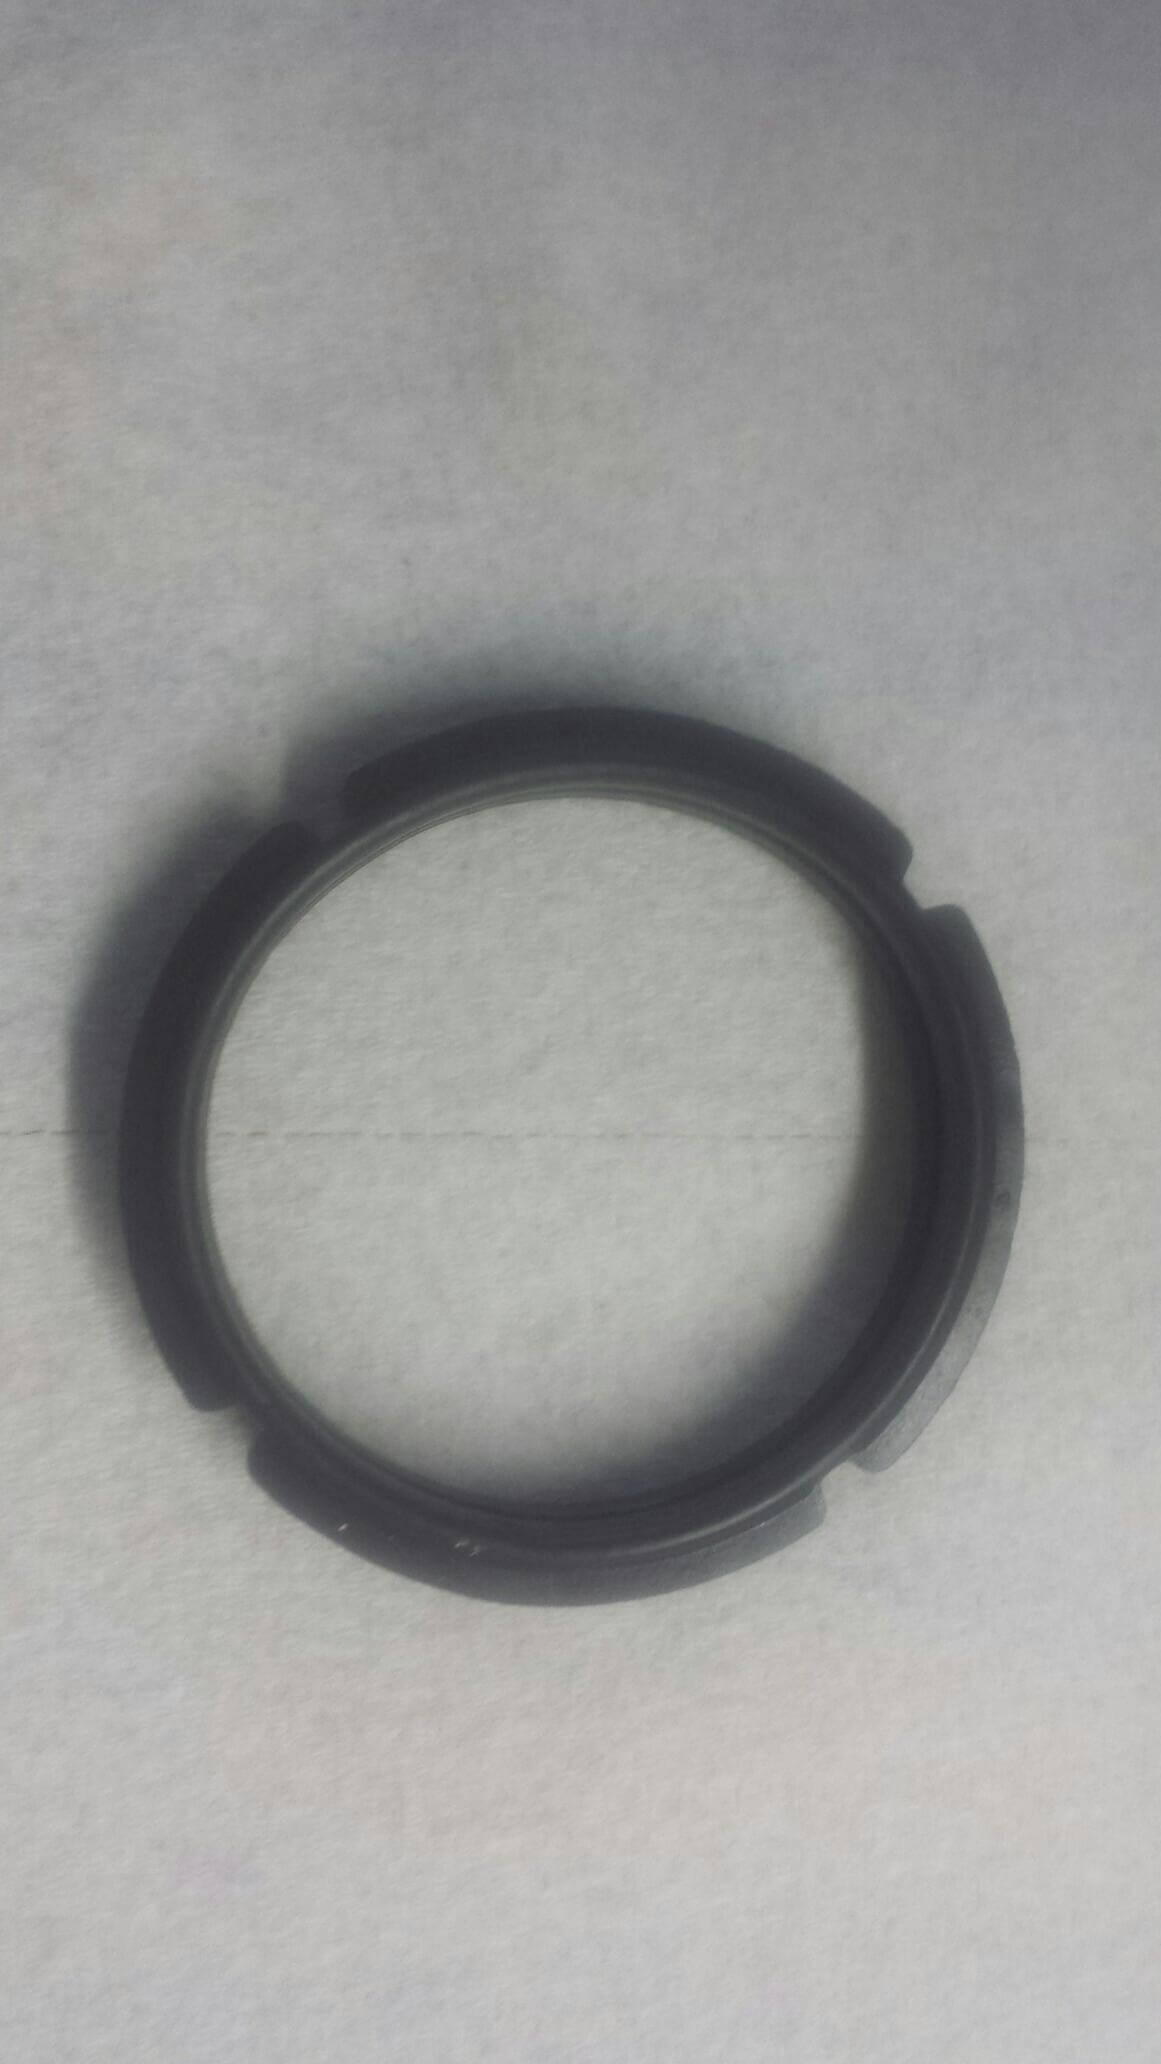 https://www.redriverinstrument.com/wp-content/uploads/2015/10/14.3-new-style-seal-ring.jpg